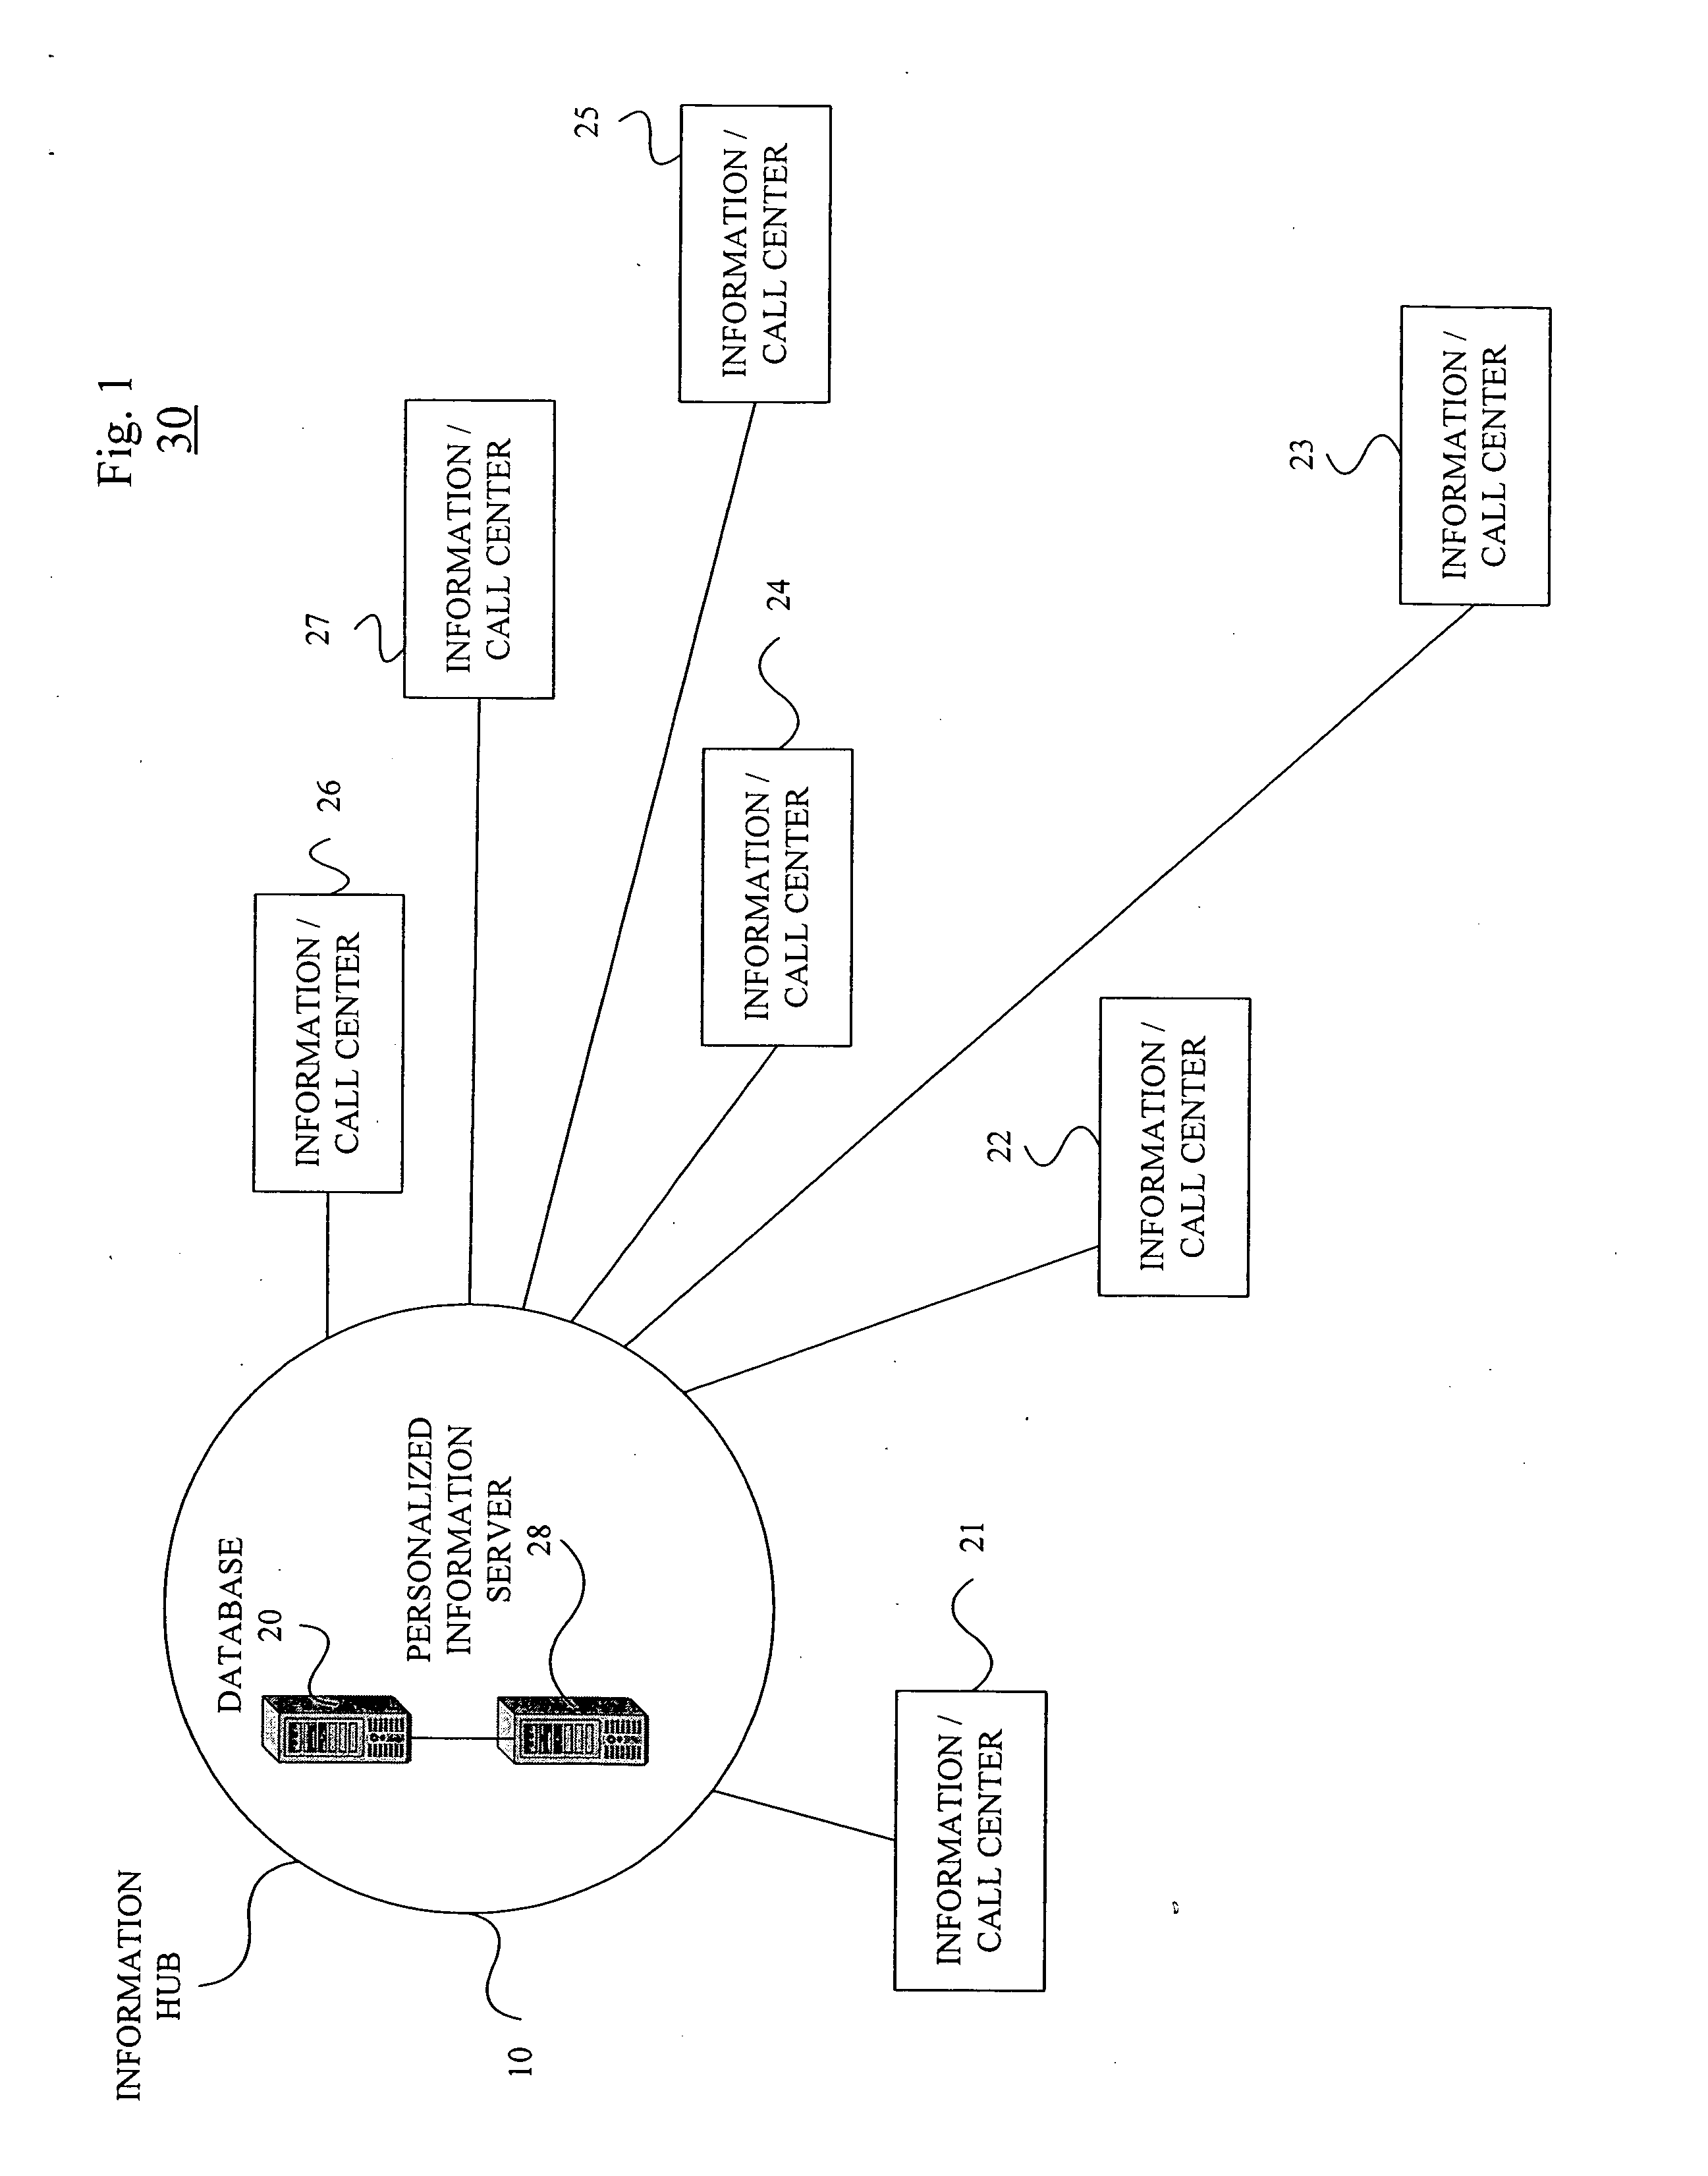 Technique for effectively assisting a user during an information assistance call